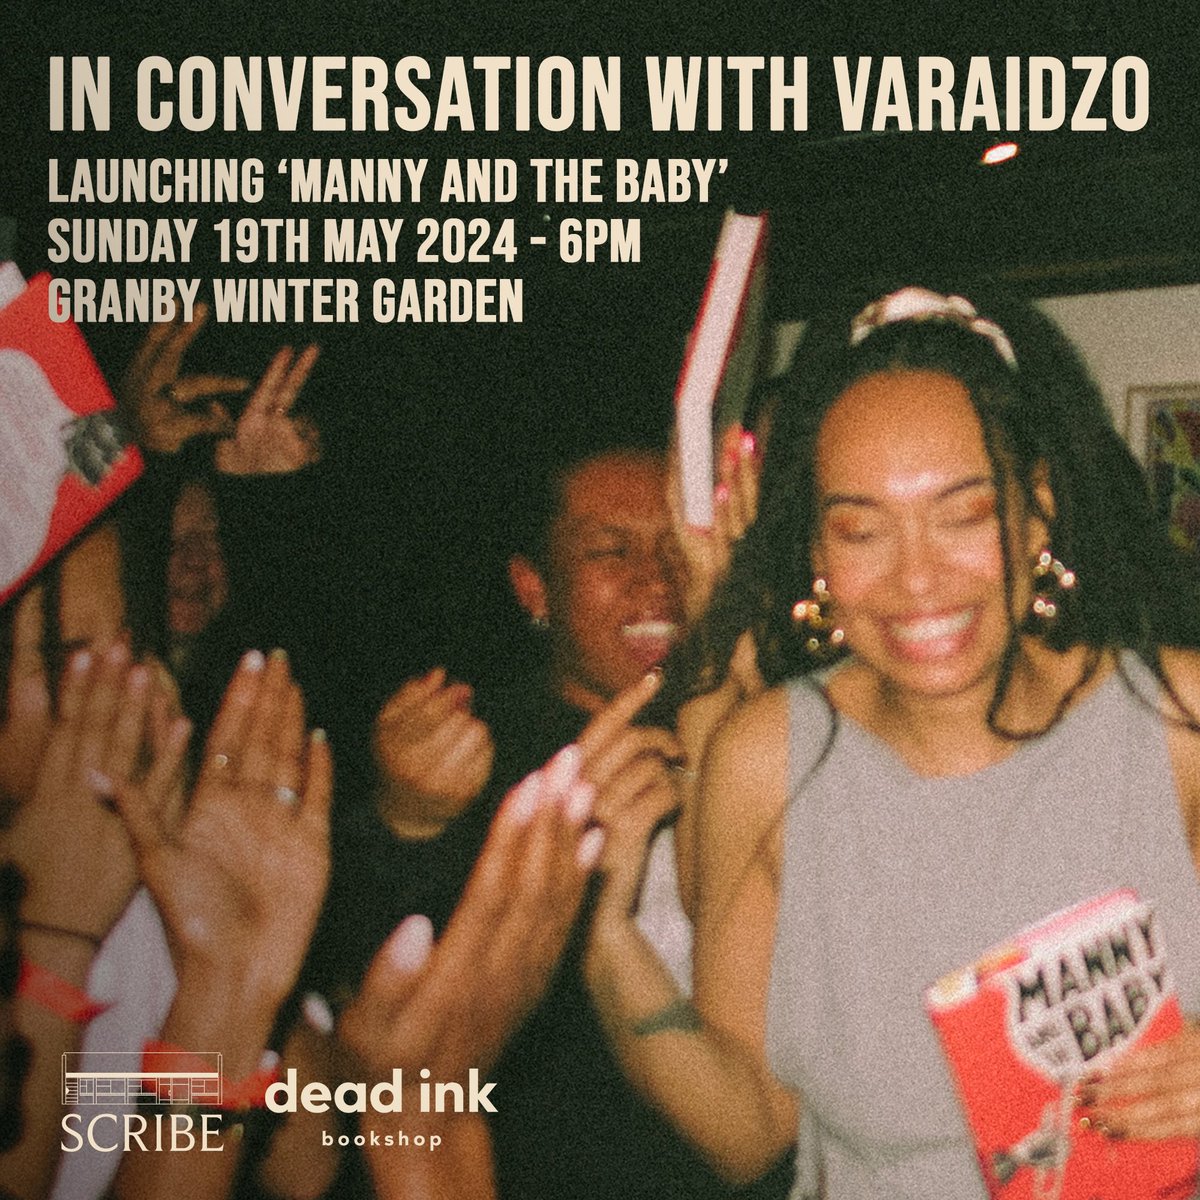 🗓️ Liverpool, you are invited! Join VARAIDZO (@practicalmyth) in conversation with Ni Maxine at Granby Winter Garden this Sunday 19th May 2024 from 6PM, talking all things ‘Manny And The Baby’. Get tickets here: fatsoma.com/e/lg0fz9b2/in-…